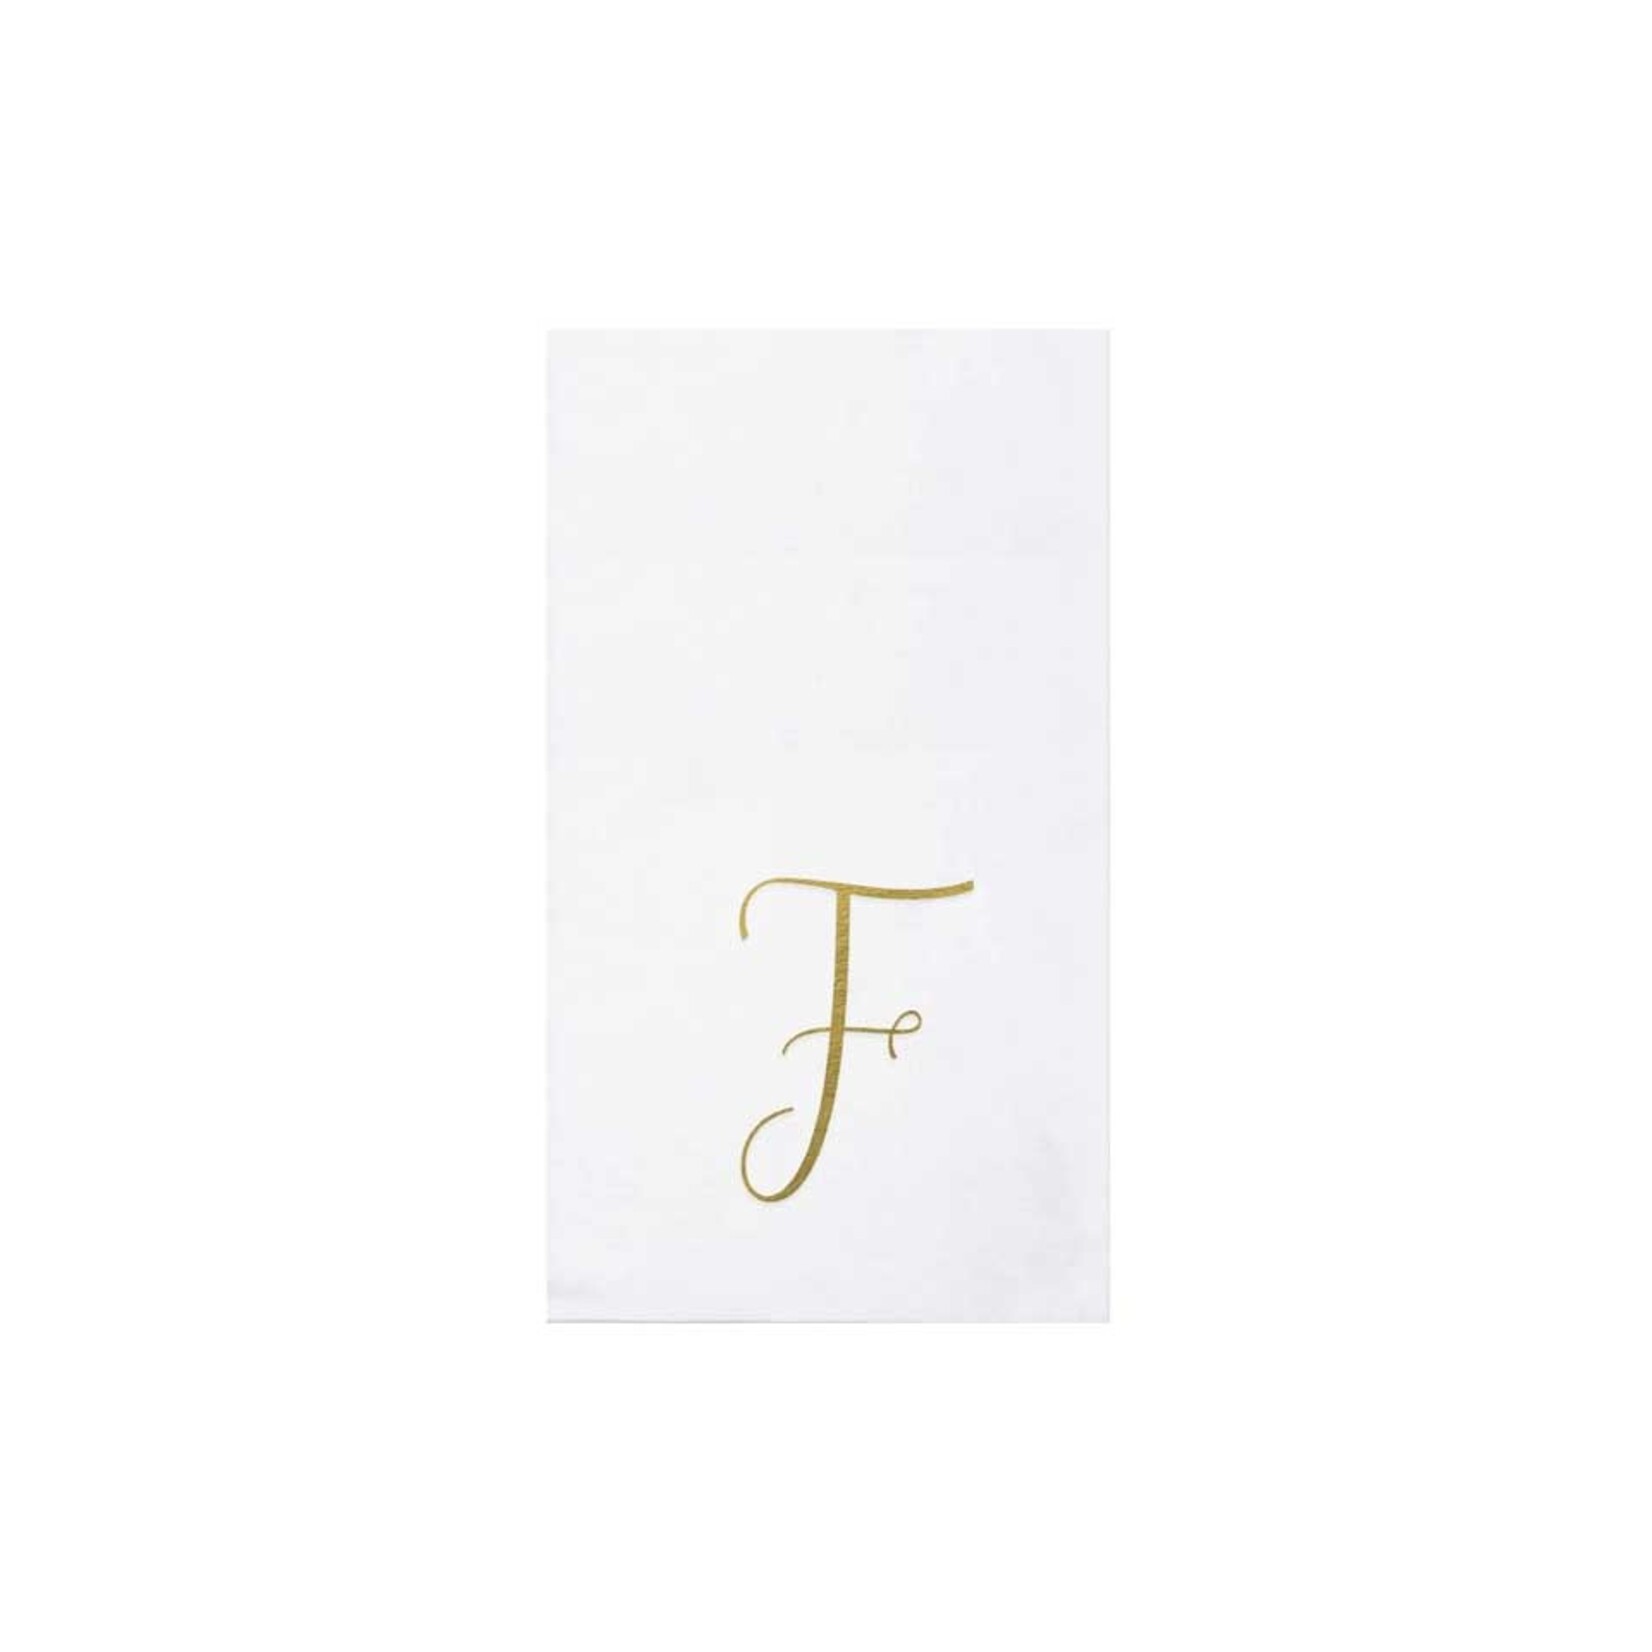 VIETRI Papersoft Napkins Gold Monogram Guest Towels - F (Pack of 20)